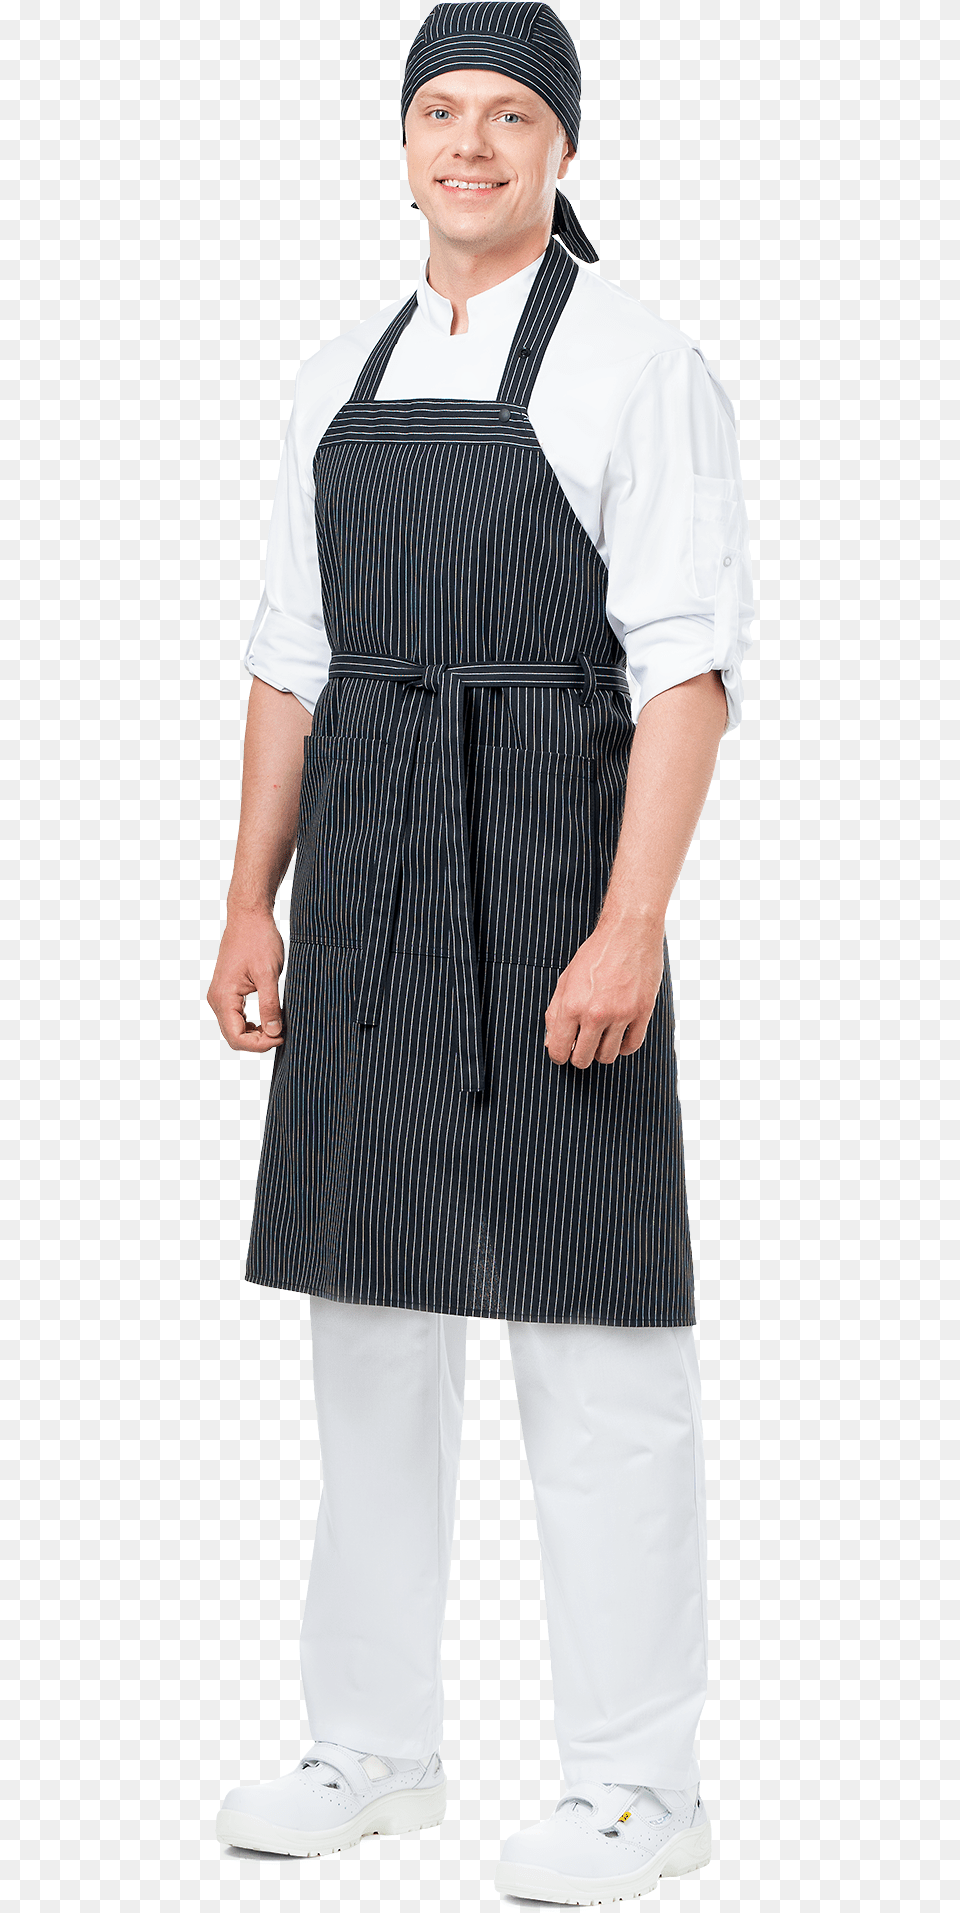 Grill Bib Apron Black And White Stripes A Line, Adult, Man, Male, Person Png Image